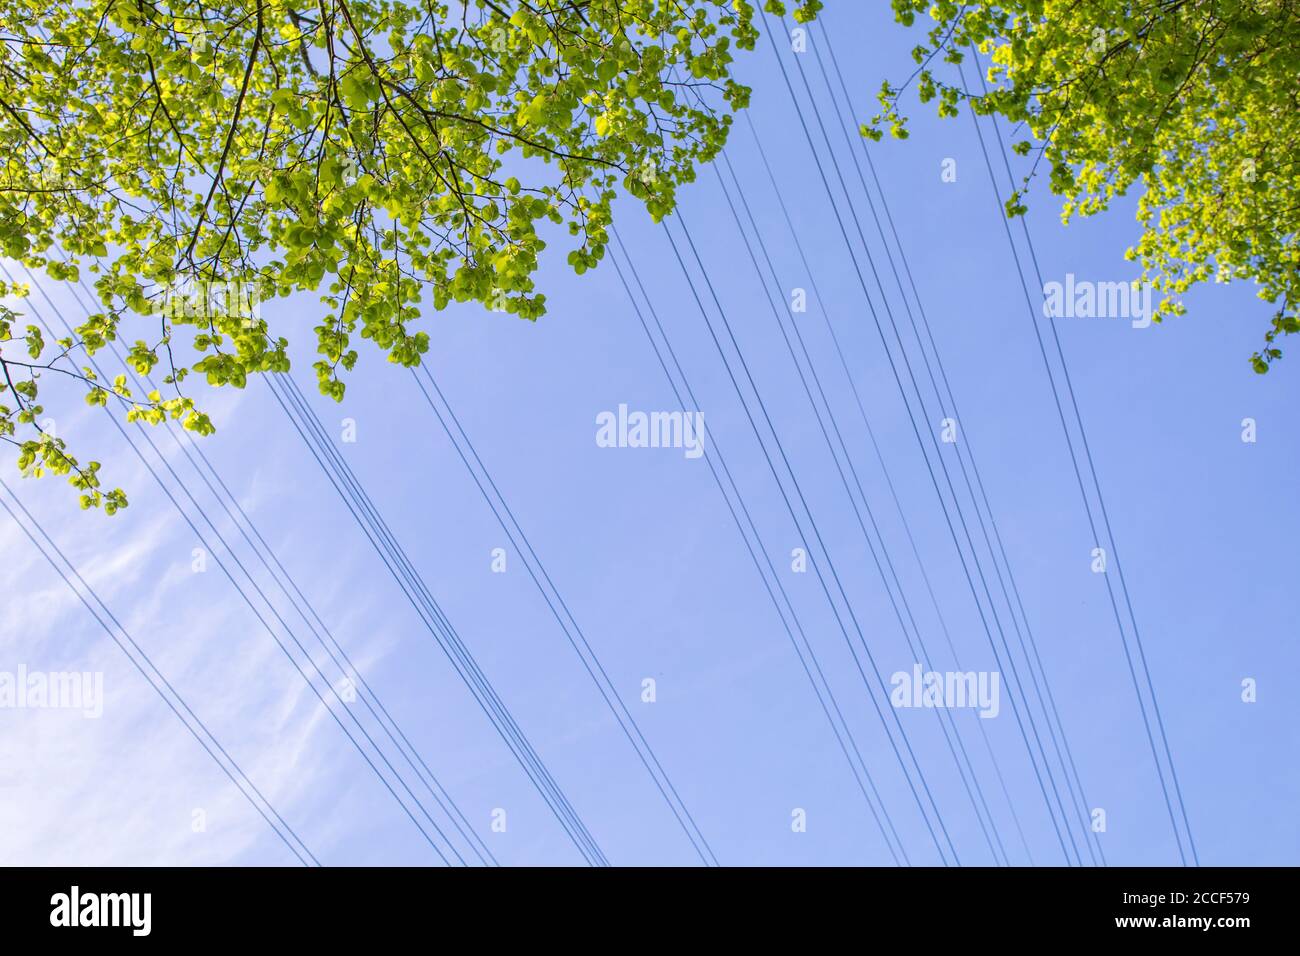 Power lines from overhead lines and foliage from a tree in spring Stock Photo